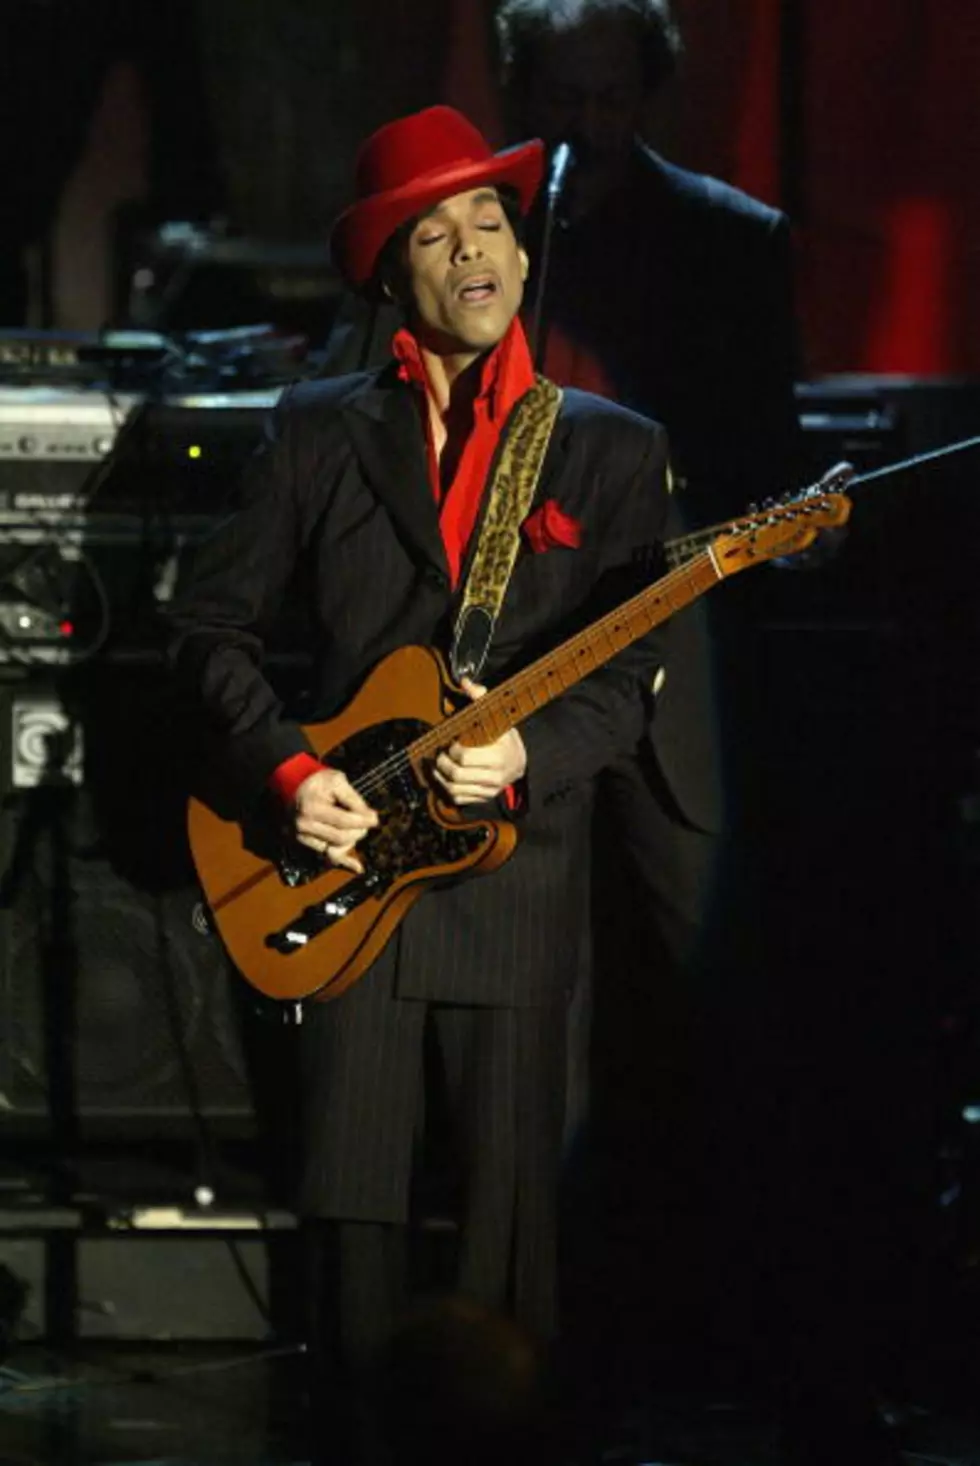 Prince Was an Amazing Guitarist